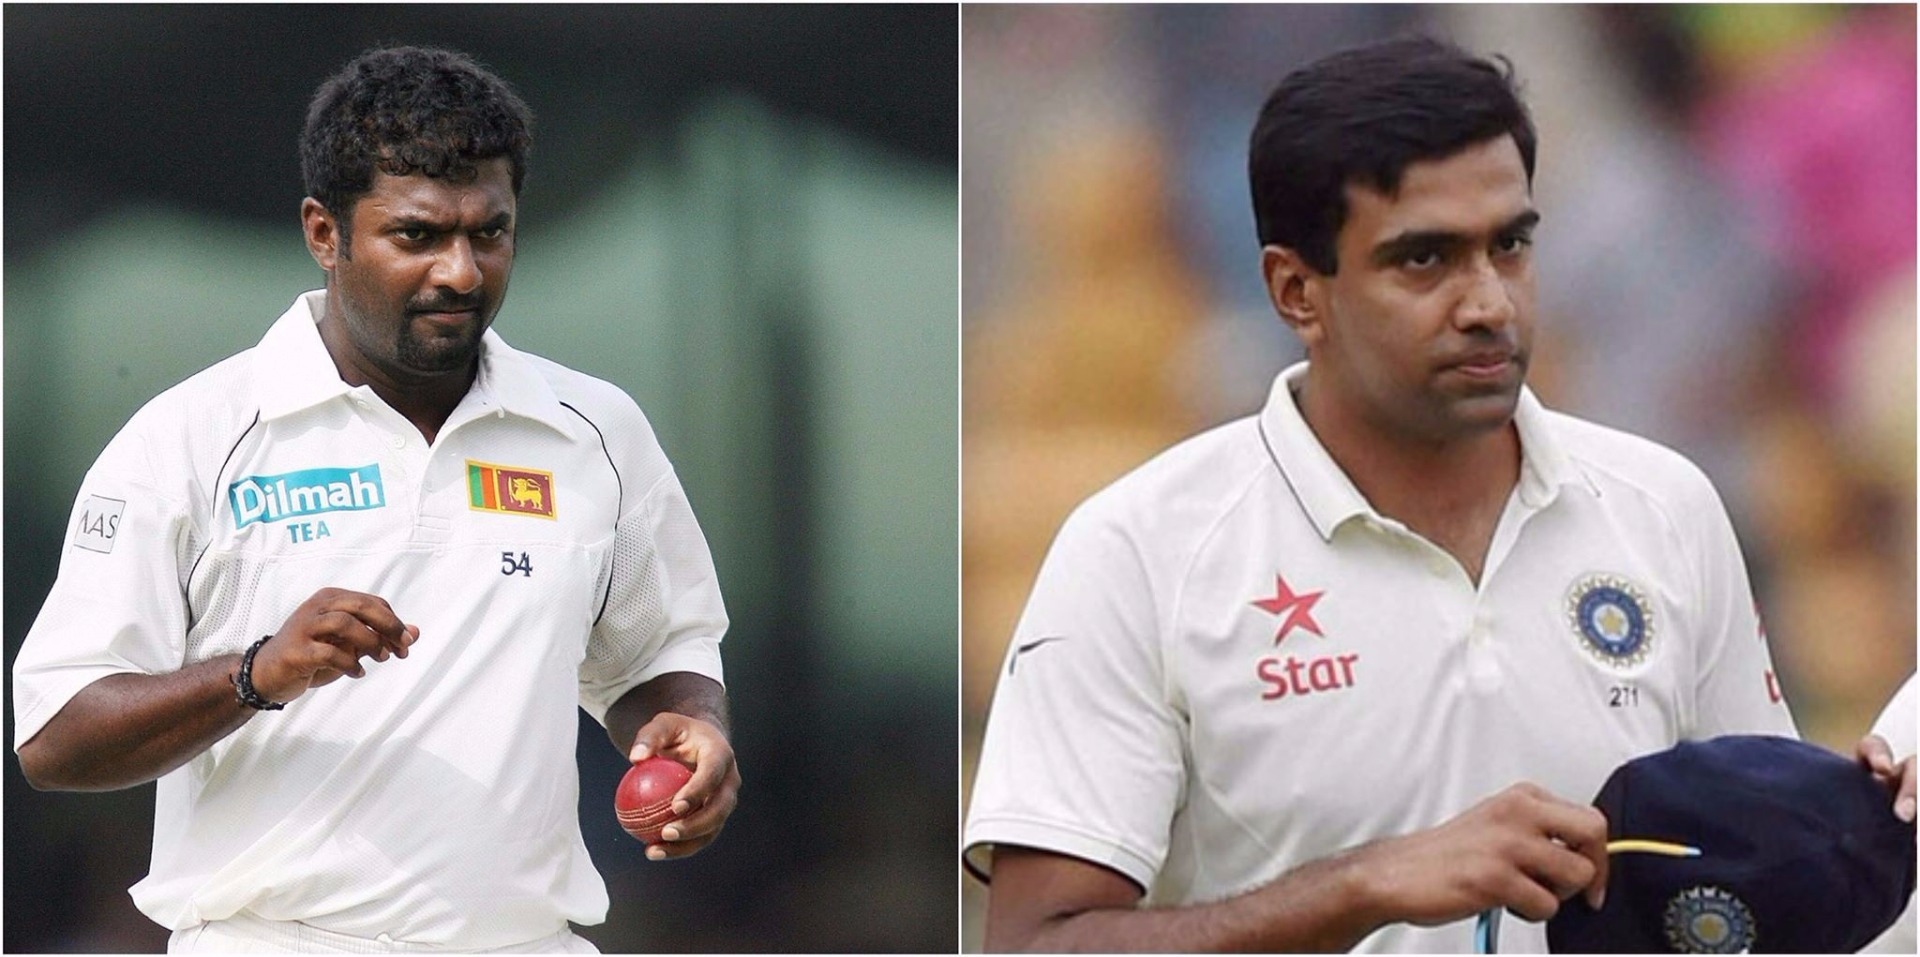 ashwin is currently the best spinner in the world says muralitharan Ashwin is currently the best spinner in the world, says Muralitharan